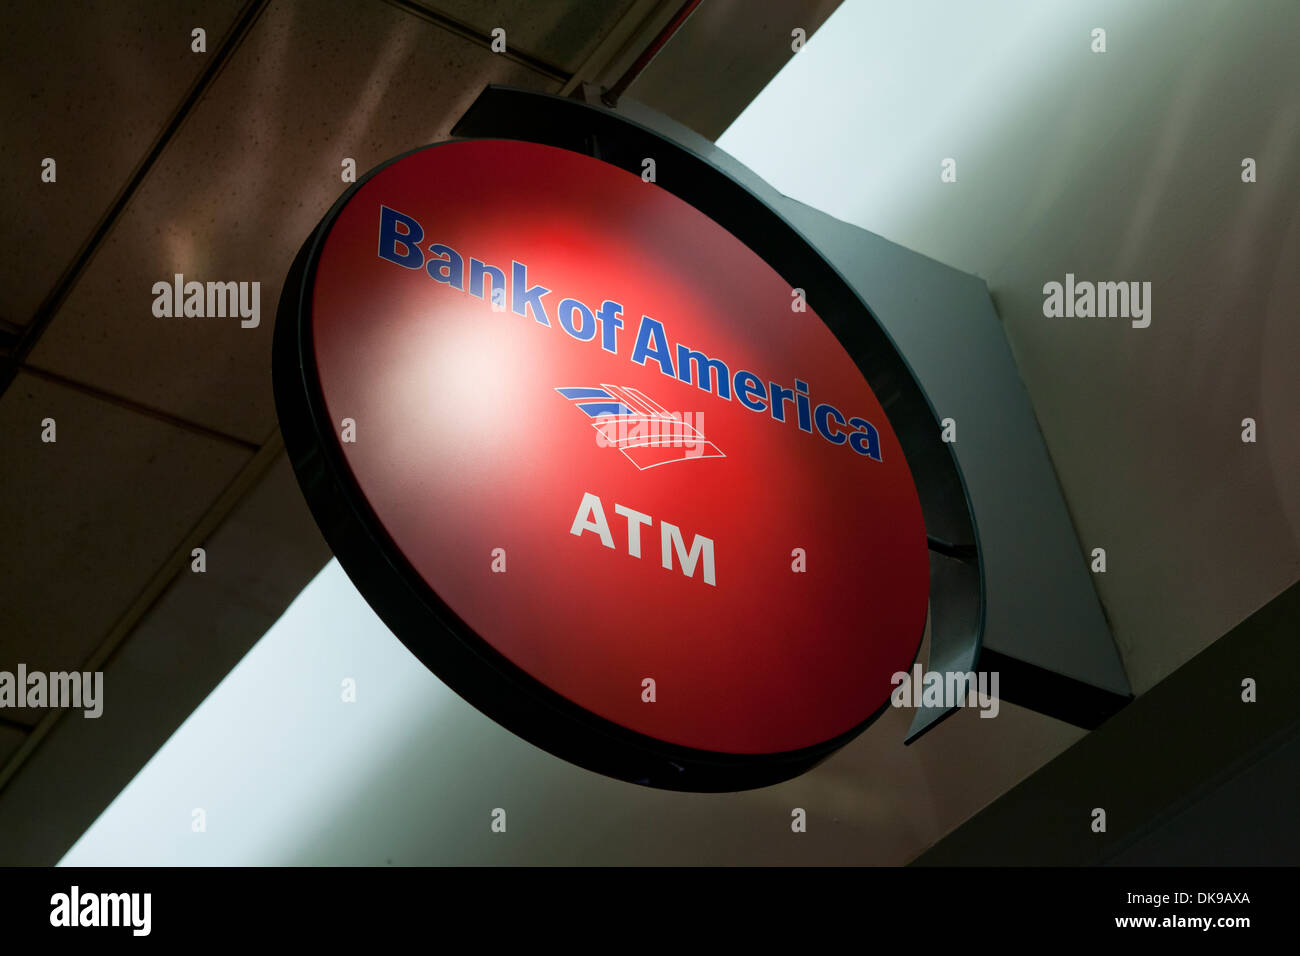 Bank of America ATM sign Stock Photo